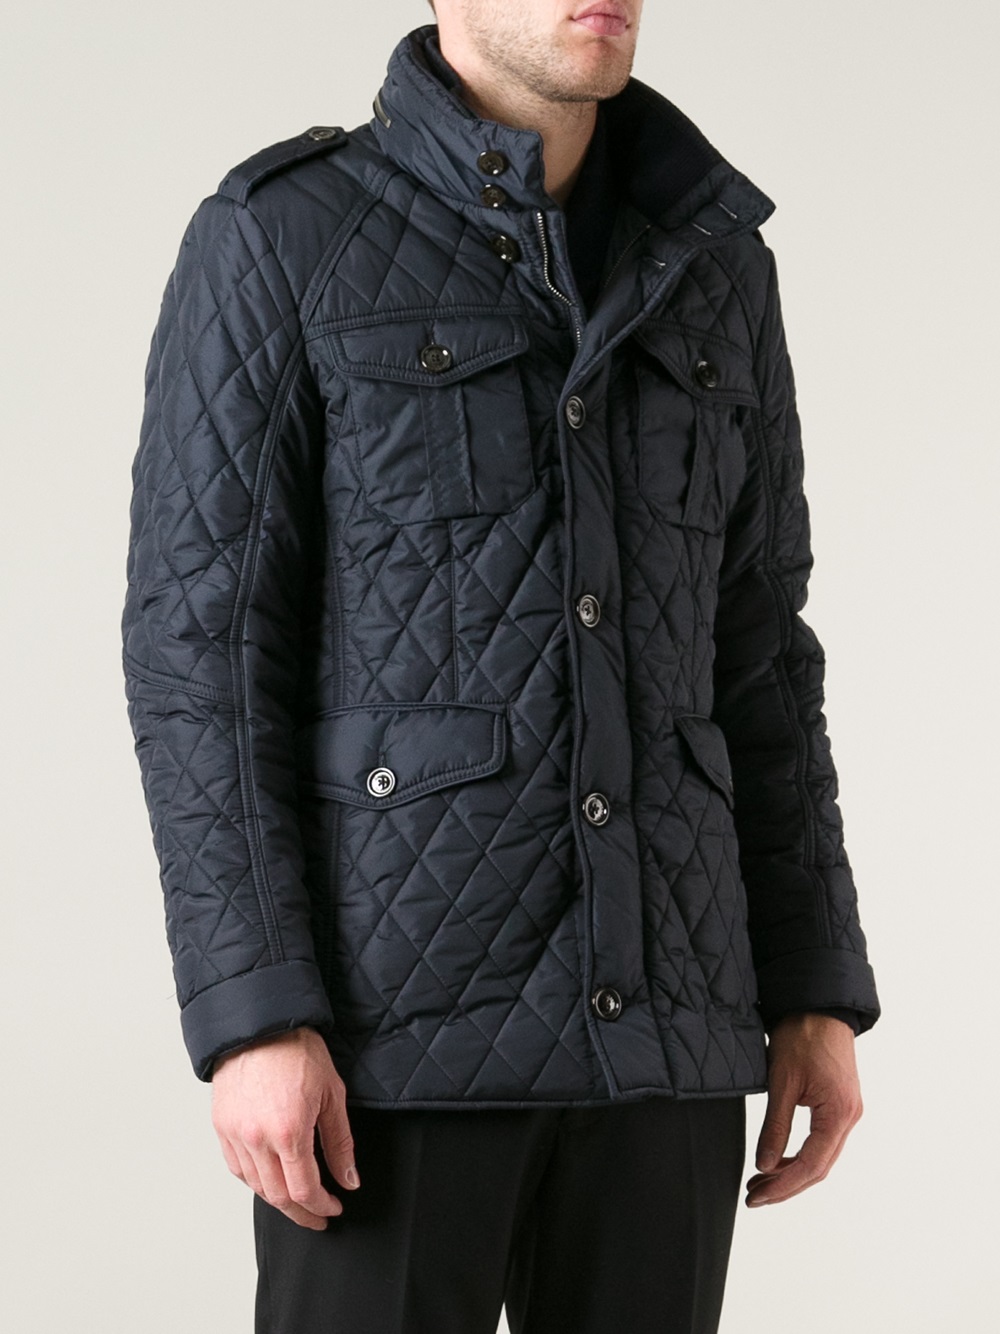 Hackett Quilted Jacket in Blue for Men - Lyst